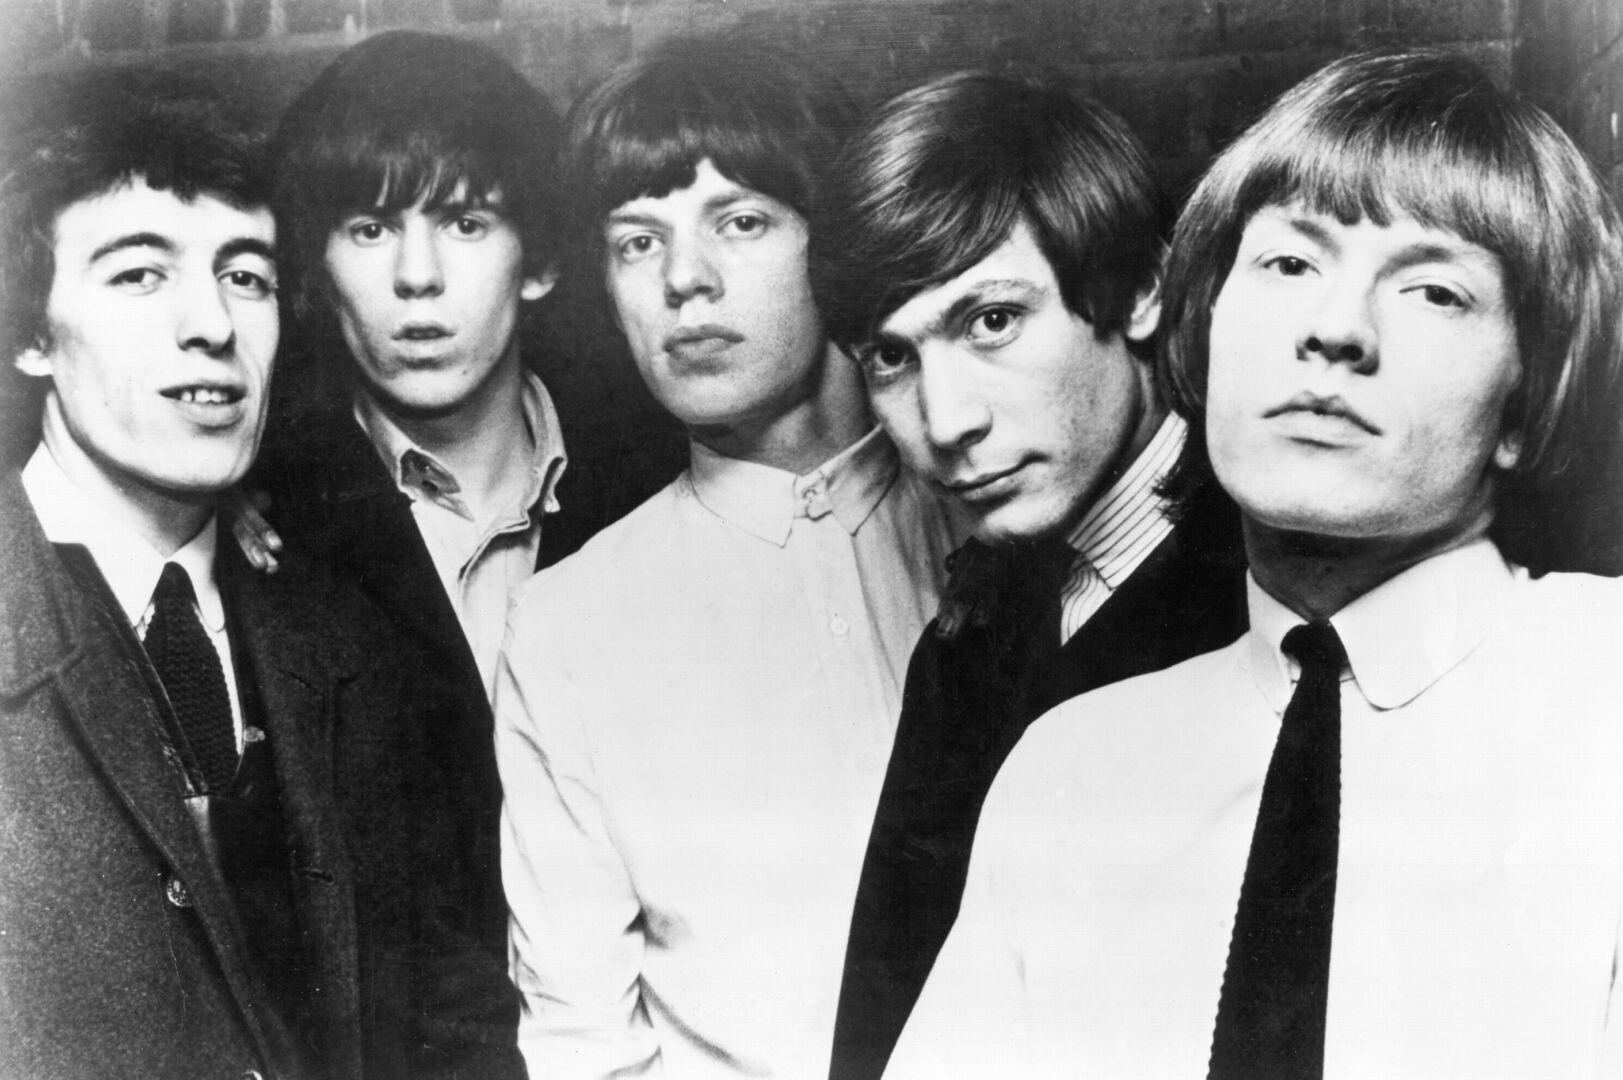 The-Stones-and-Brian-Jones_st_5_jpg_sd-high_Copyright-Getty-Images-Photo-courtesy-of-Magnolia-Pictures